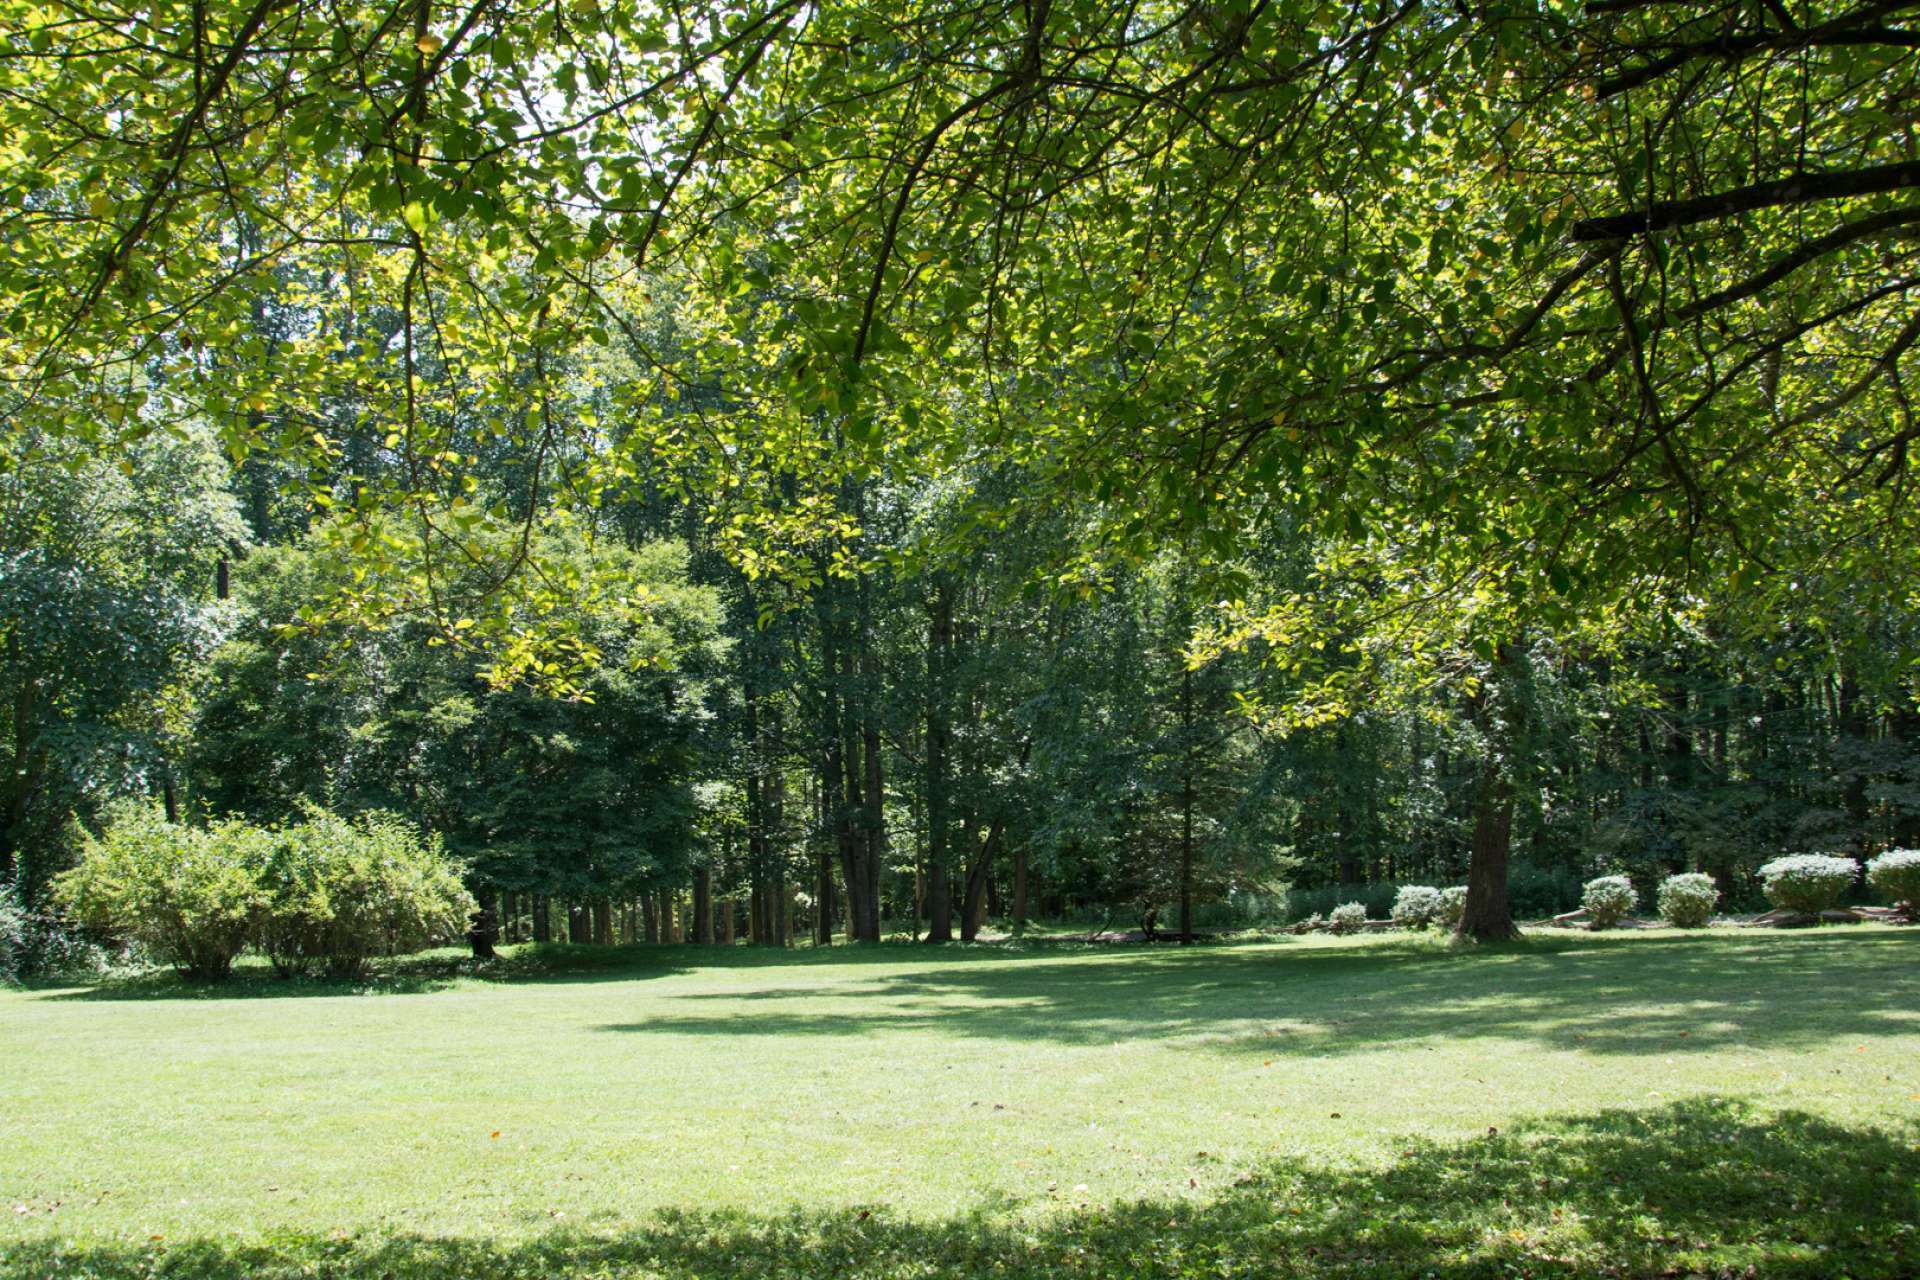 A lush green lawn with large shade trees provide a wonderful space for outdoor games or gardens.